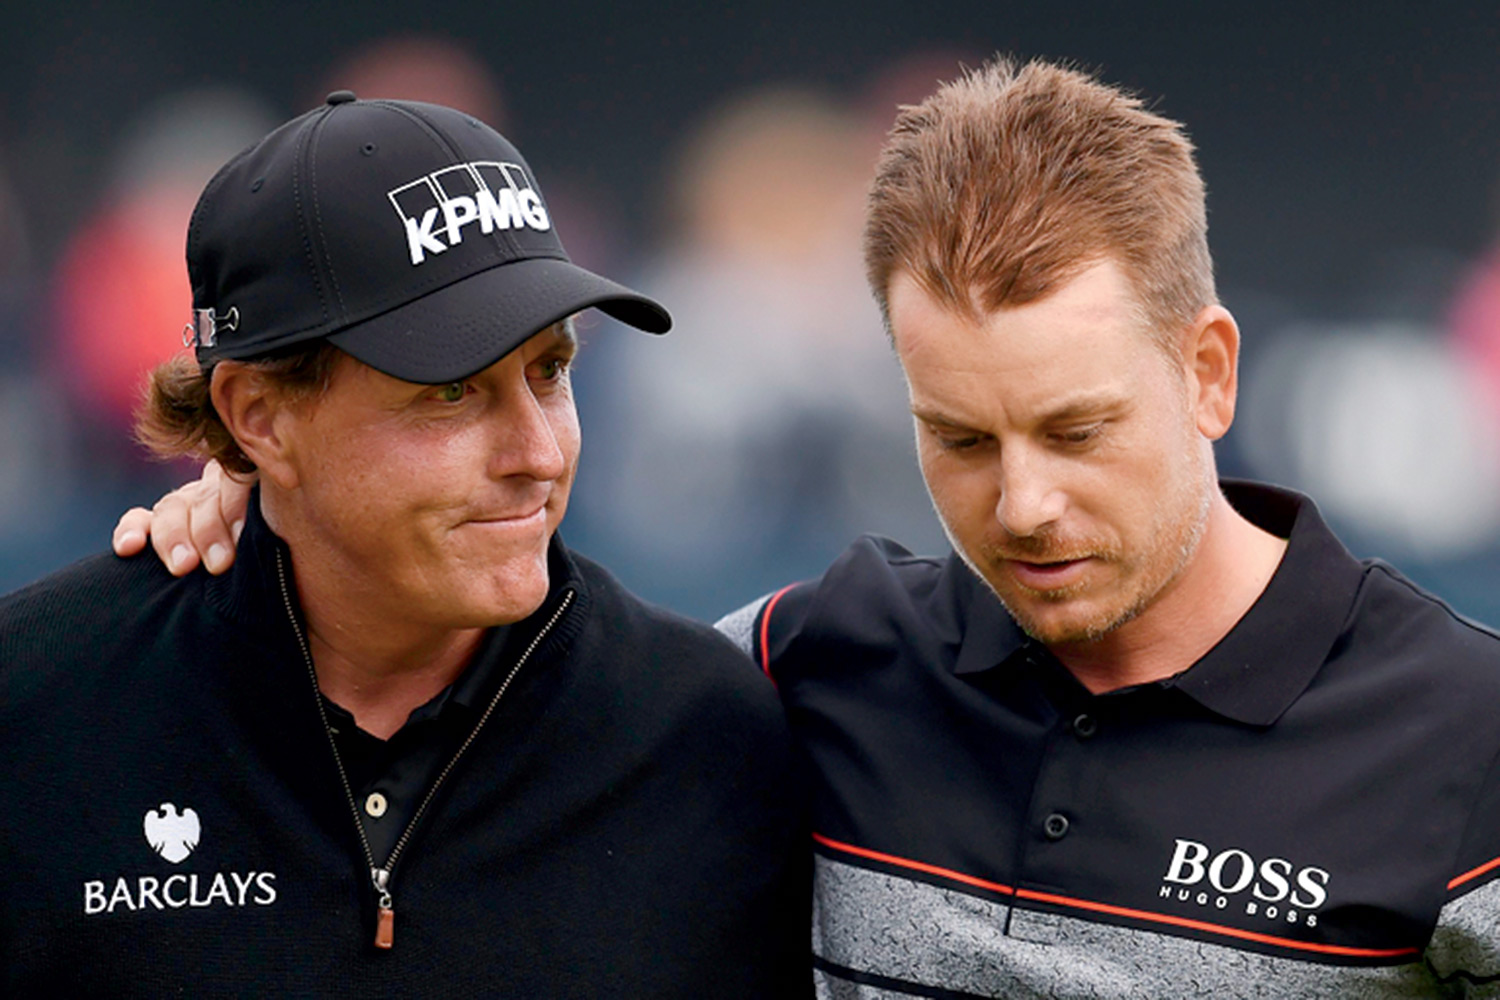 ’At Oakmont, I’d told him he had the game to win a major. I’d said, “I hope it’s not at my expense,” and a month later, it was at my expense.’ – Phil Mickelson